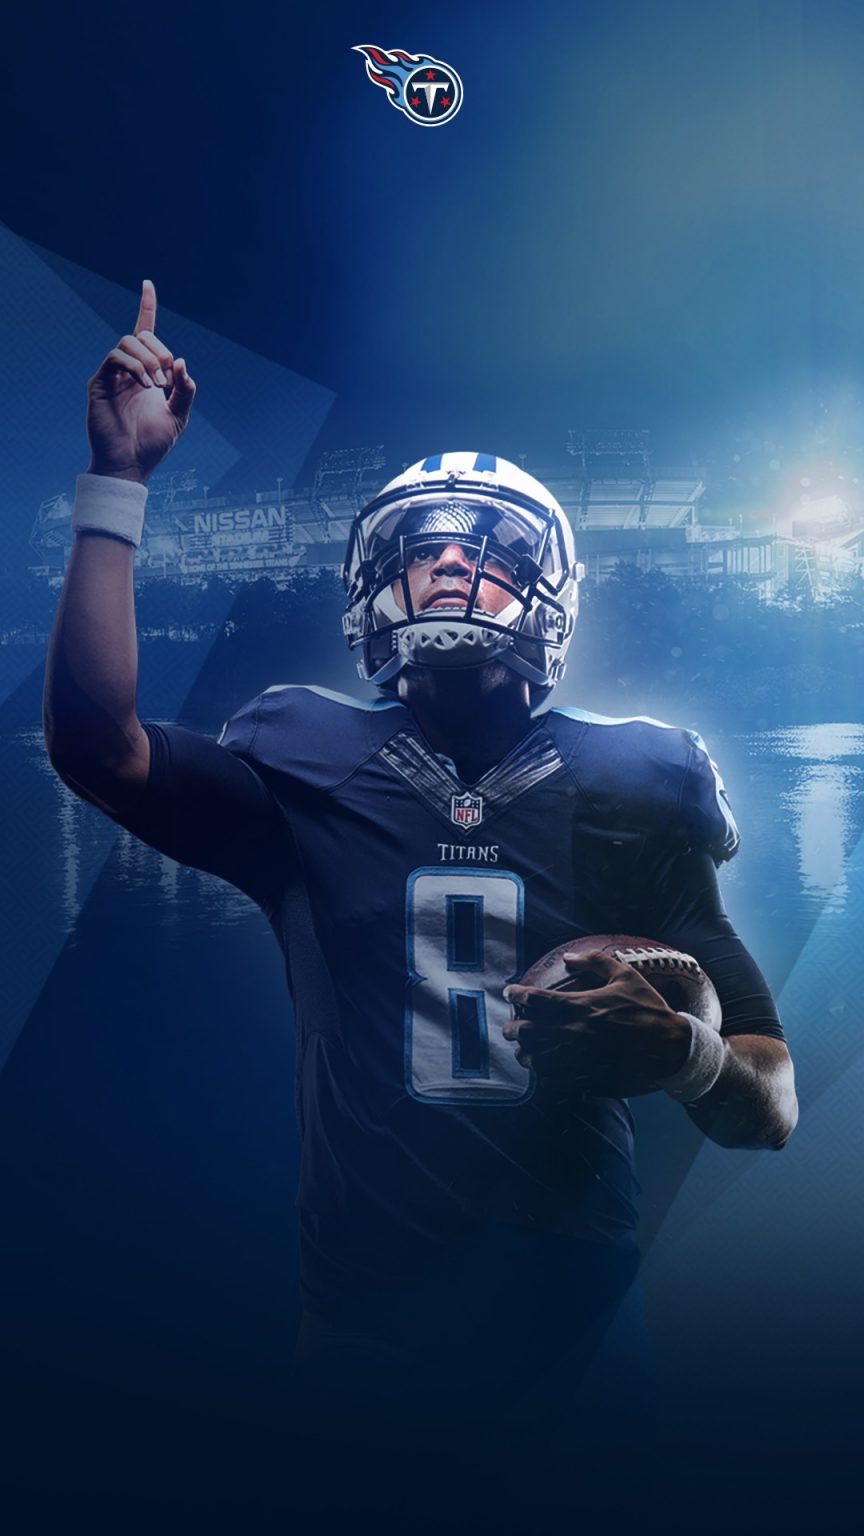 Tennessee Titans Wallpaper For Mobile Nfl Football Wallpapers